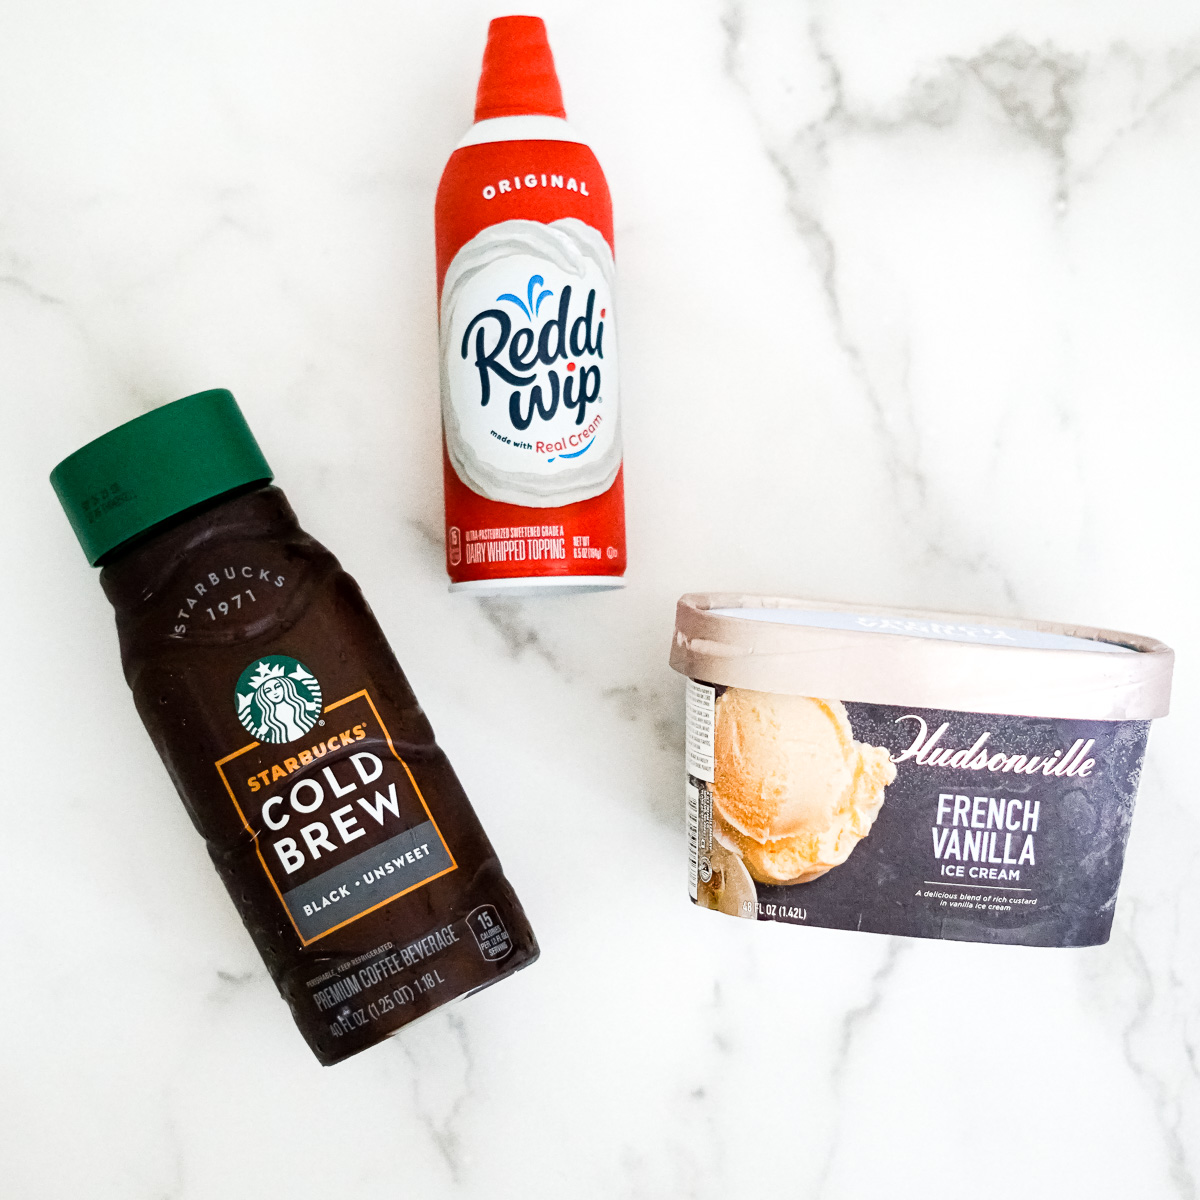 Cold Brew Coffee, Vanilla Ice Cream and whipped cream - ingredients in the Chick-fil-A Copycat Frosted Coffee